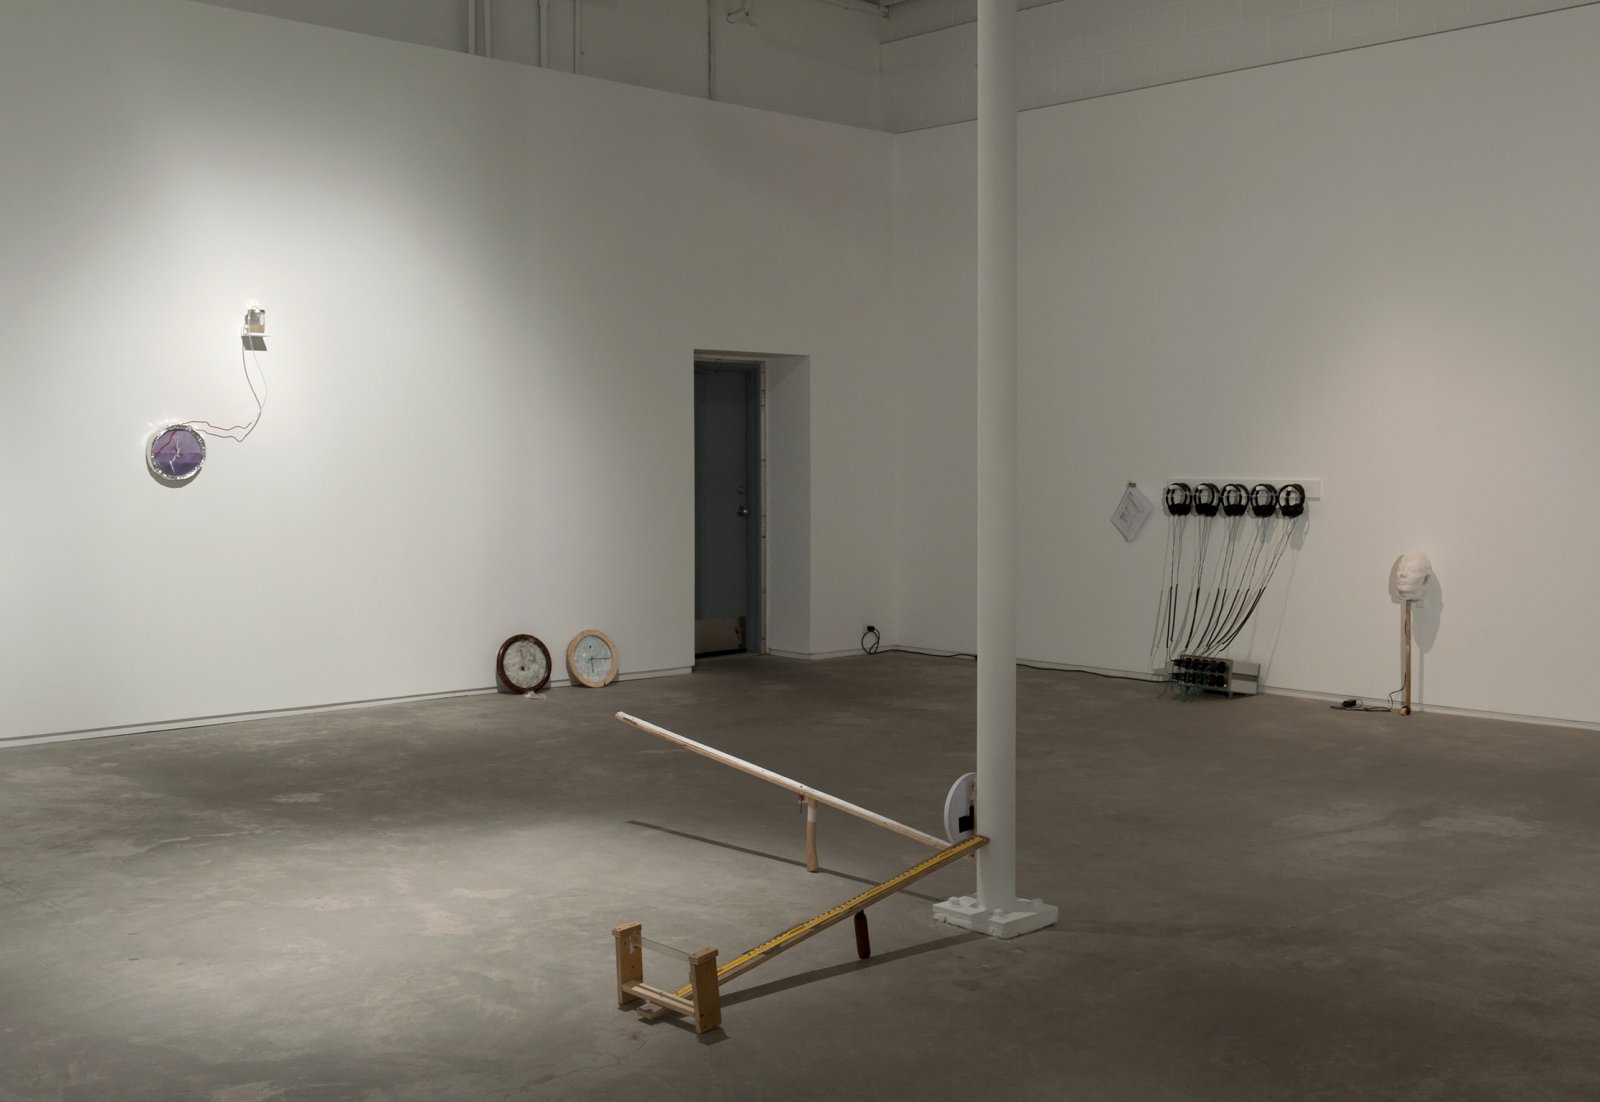 Julia Feyrer, installation view, Alternatives and Opportunities, Catriona Jeffries, 2012 by Julia Feyrer